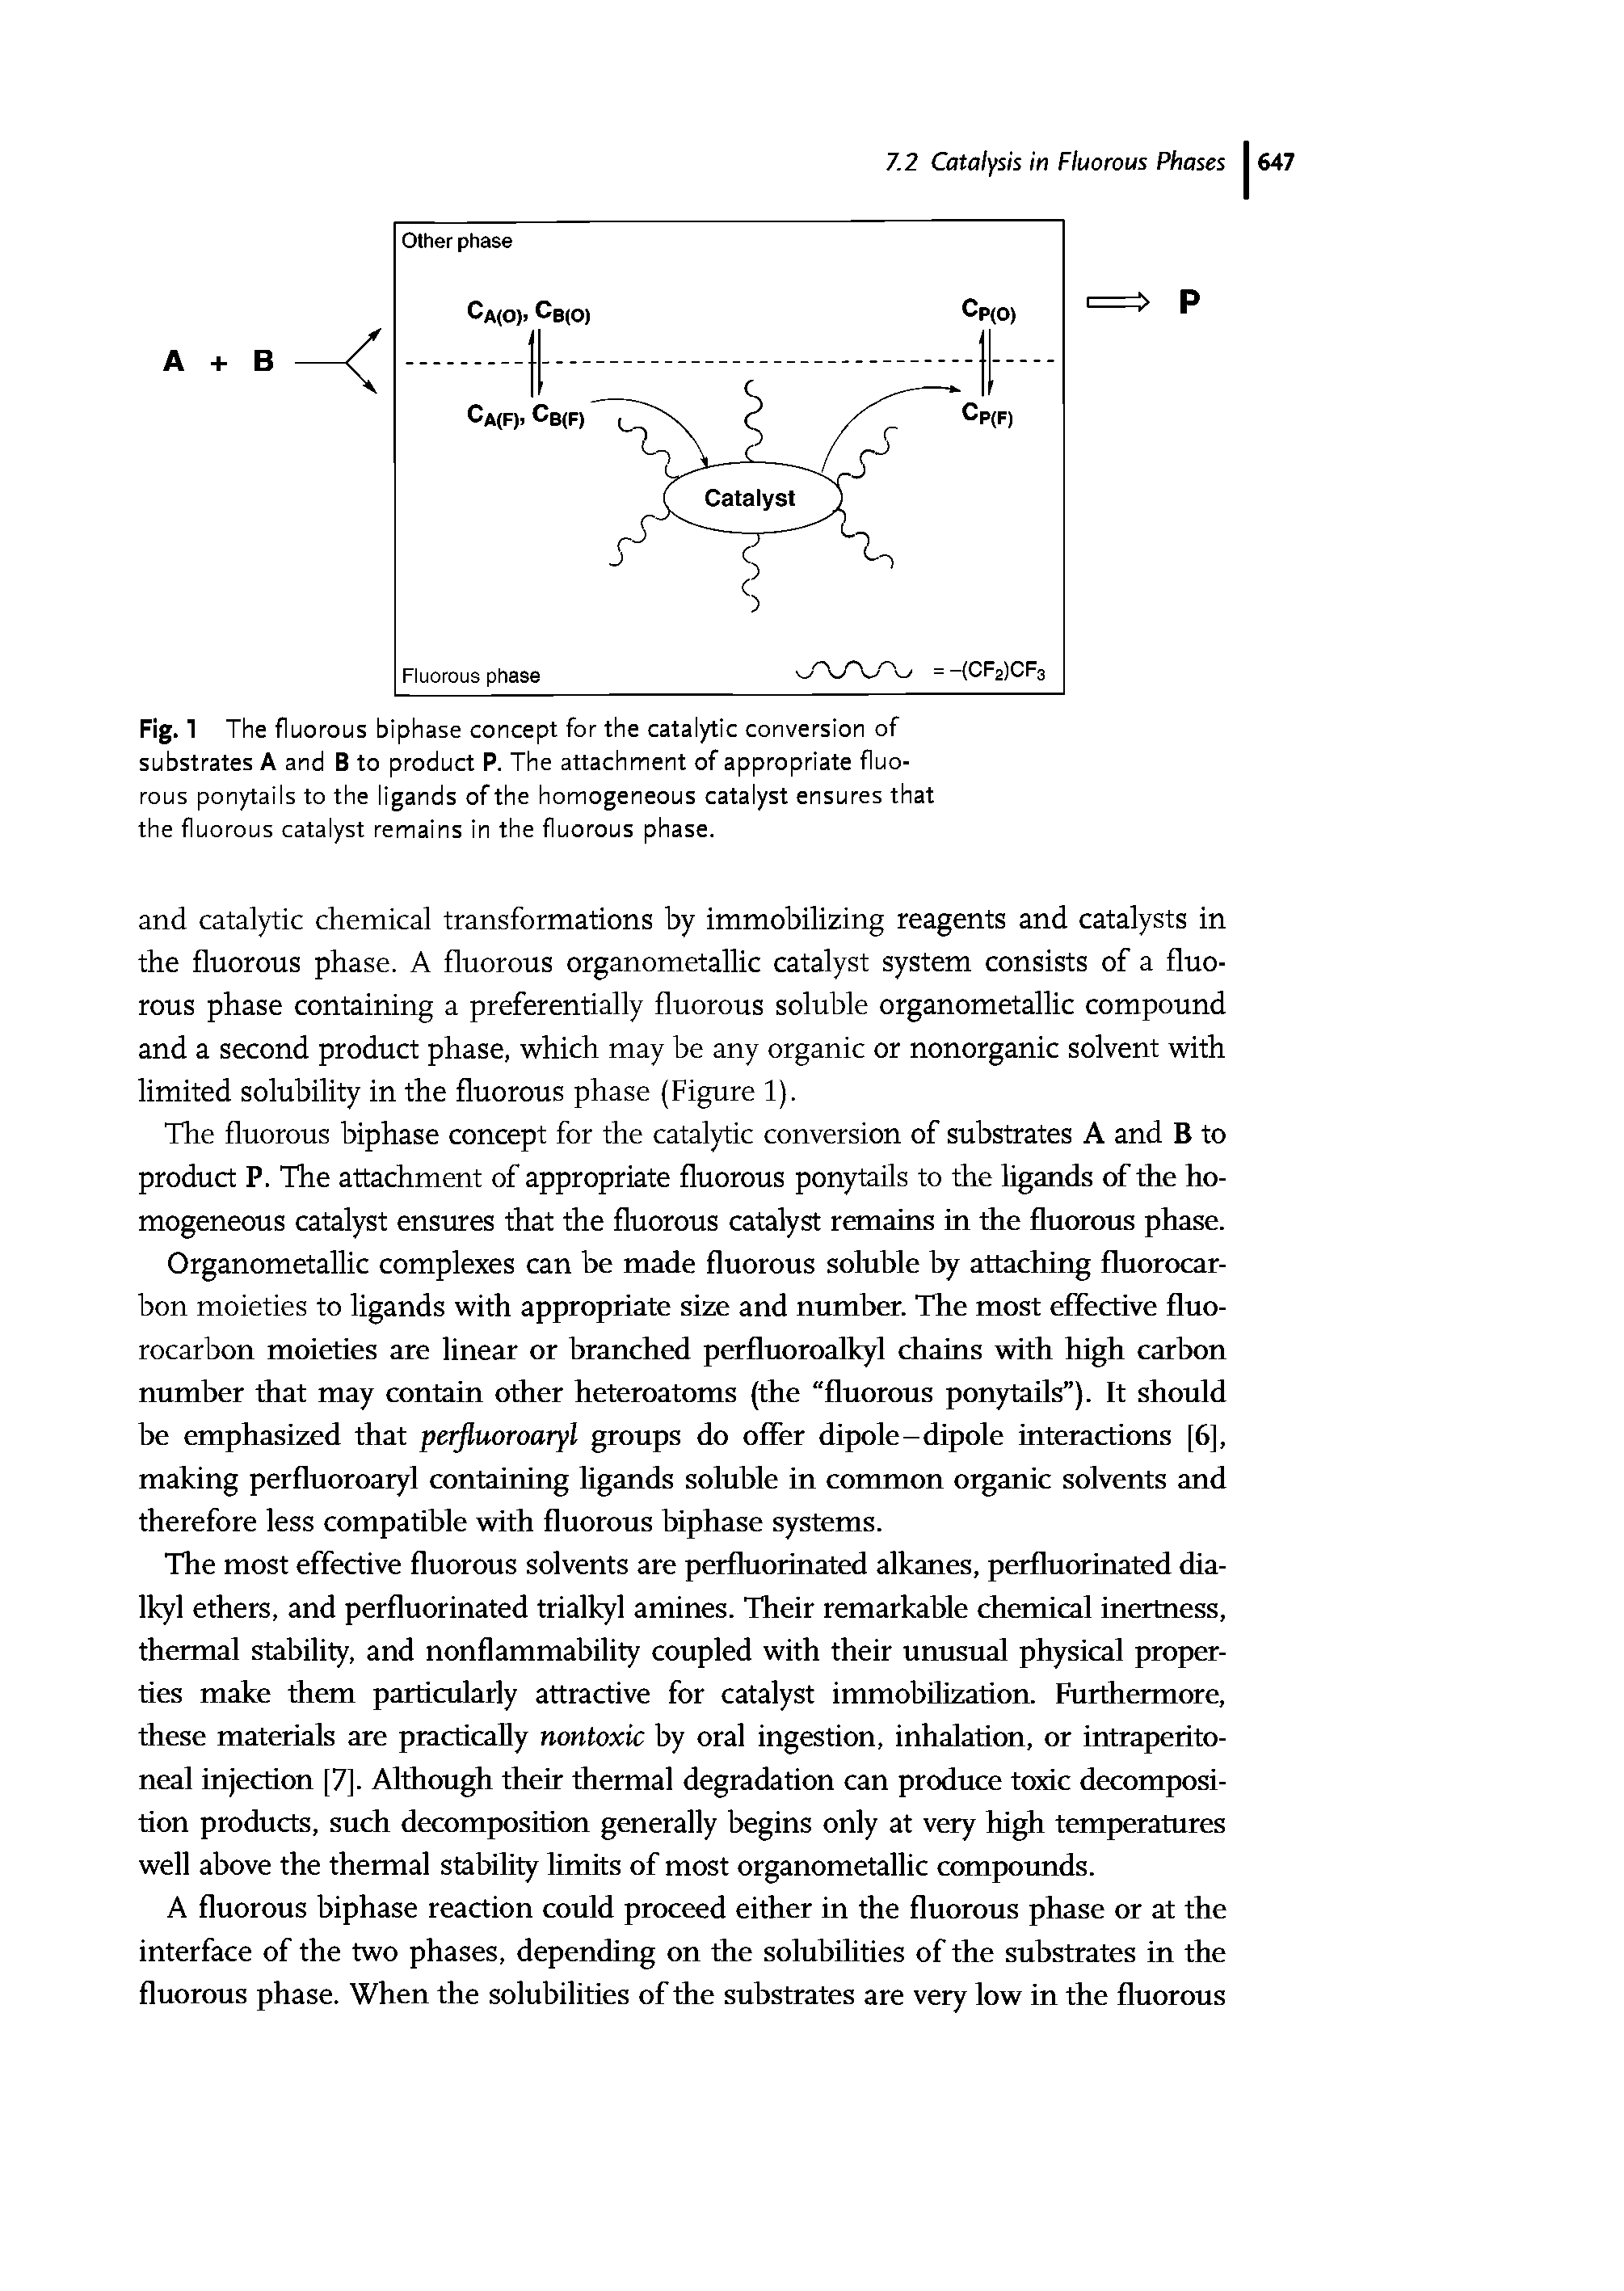 Fig. 1 The fluorous biphase concept for the catalytic conversion of substrates A and B to product P. The attachment of appropriate fluorous ponytails to the ligands of the homogeneous catalyst ensures that the fluorous catalyst remains in the fluorous phase.